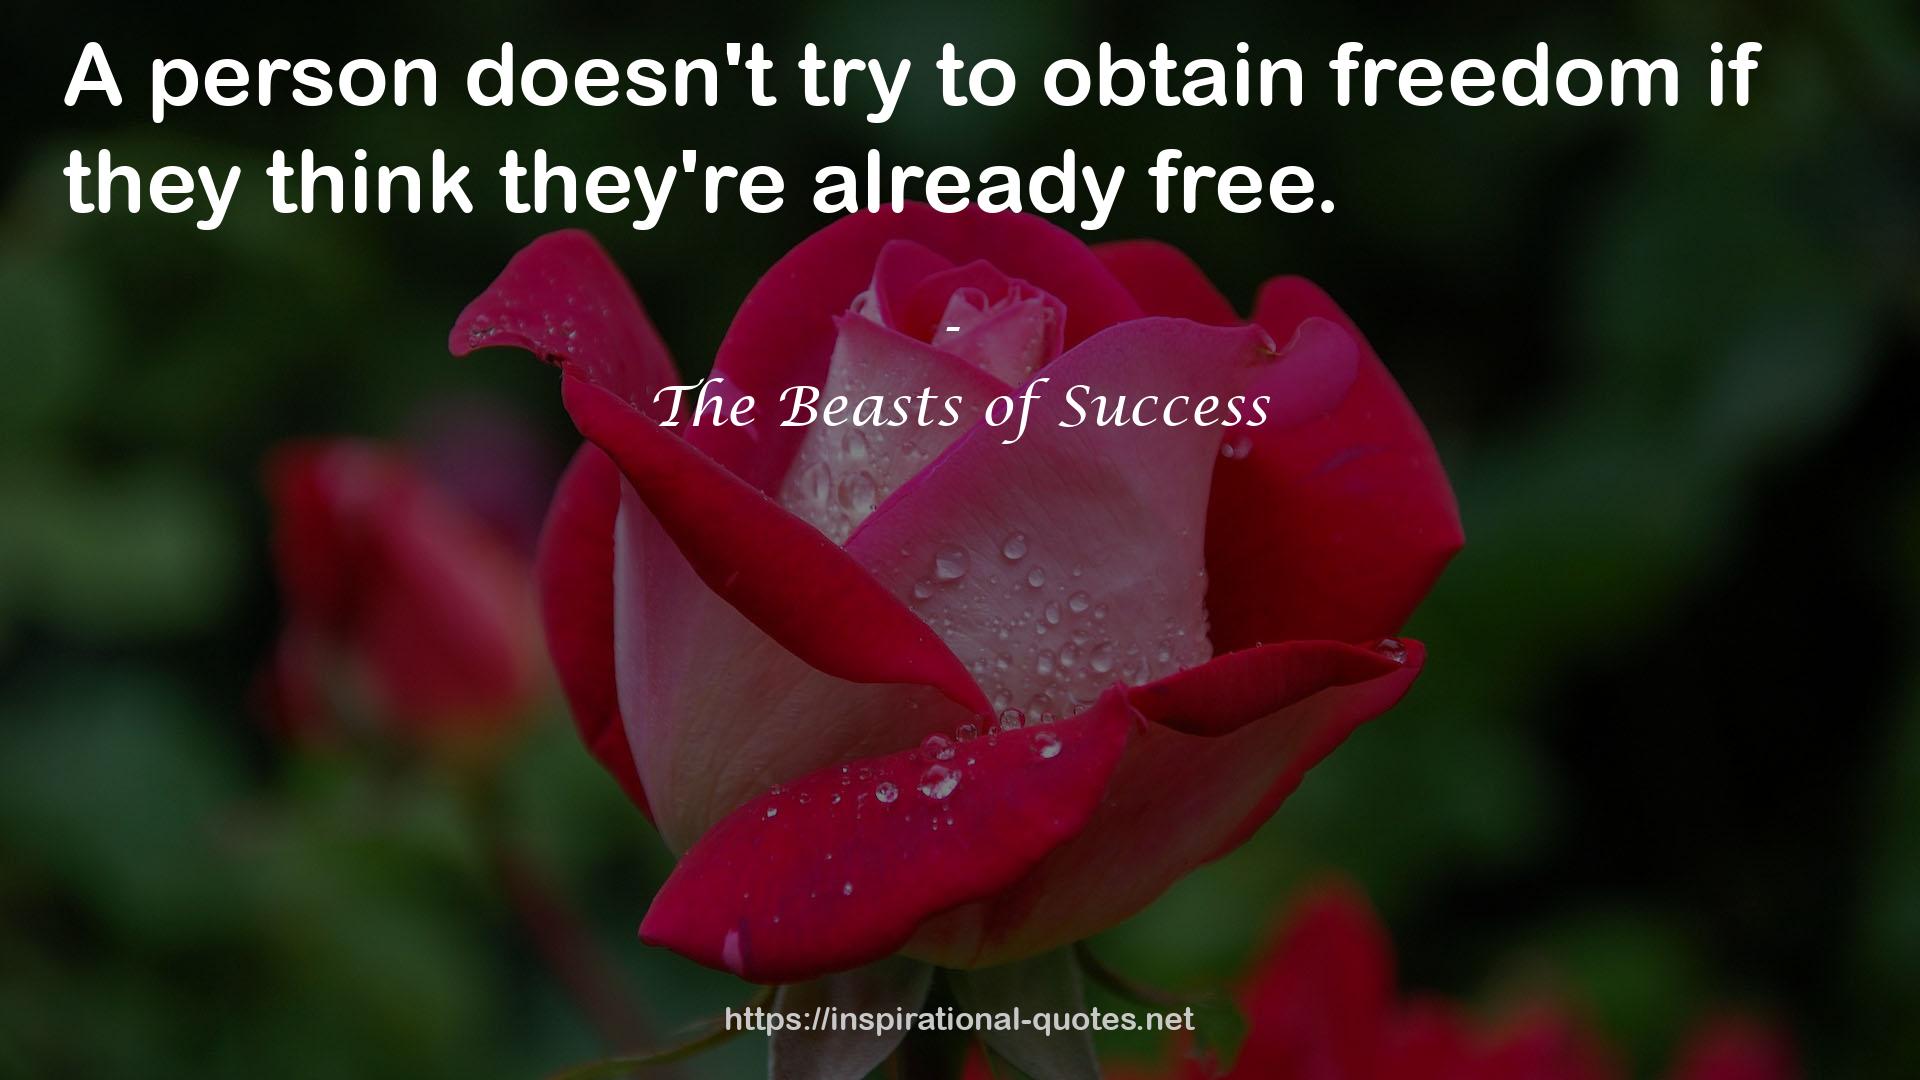 The Beasts of Success QUOTES